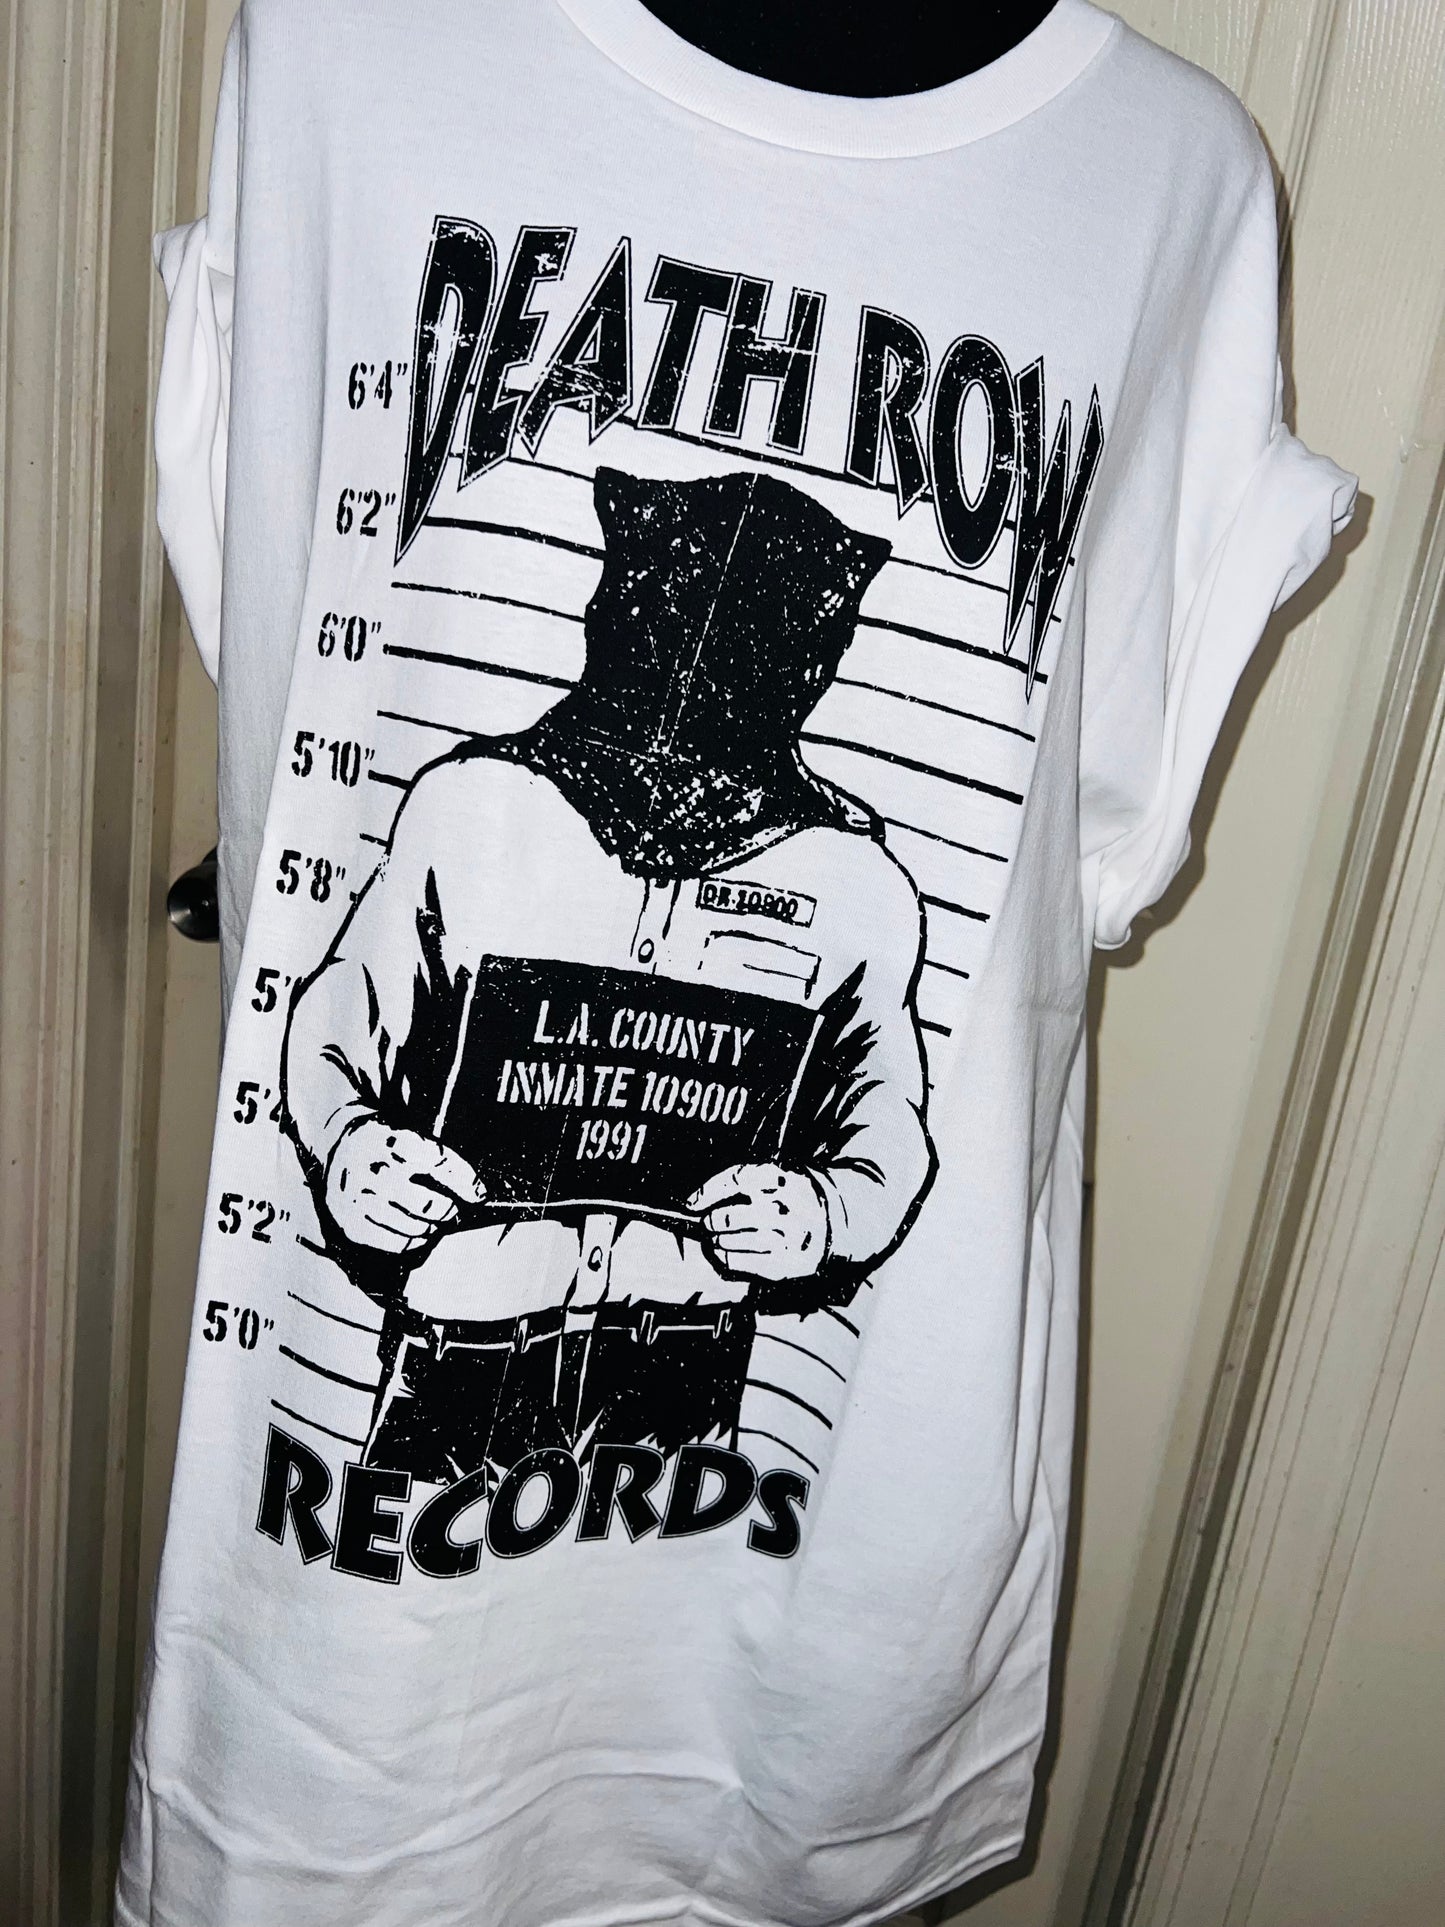 Death Row Records Oversized Distressed Tee